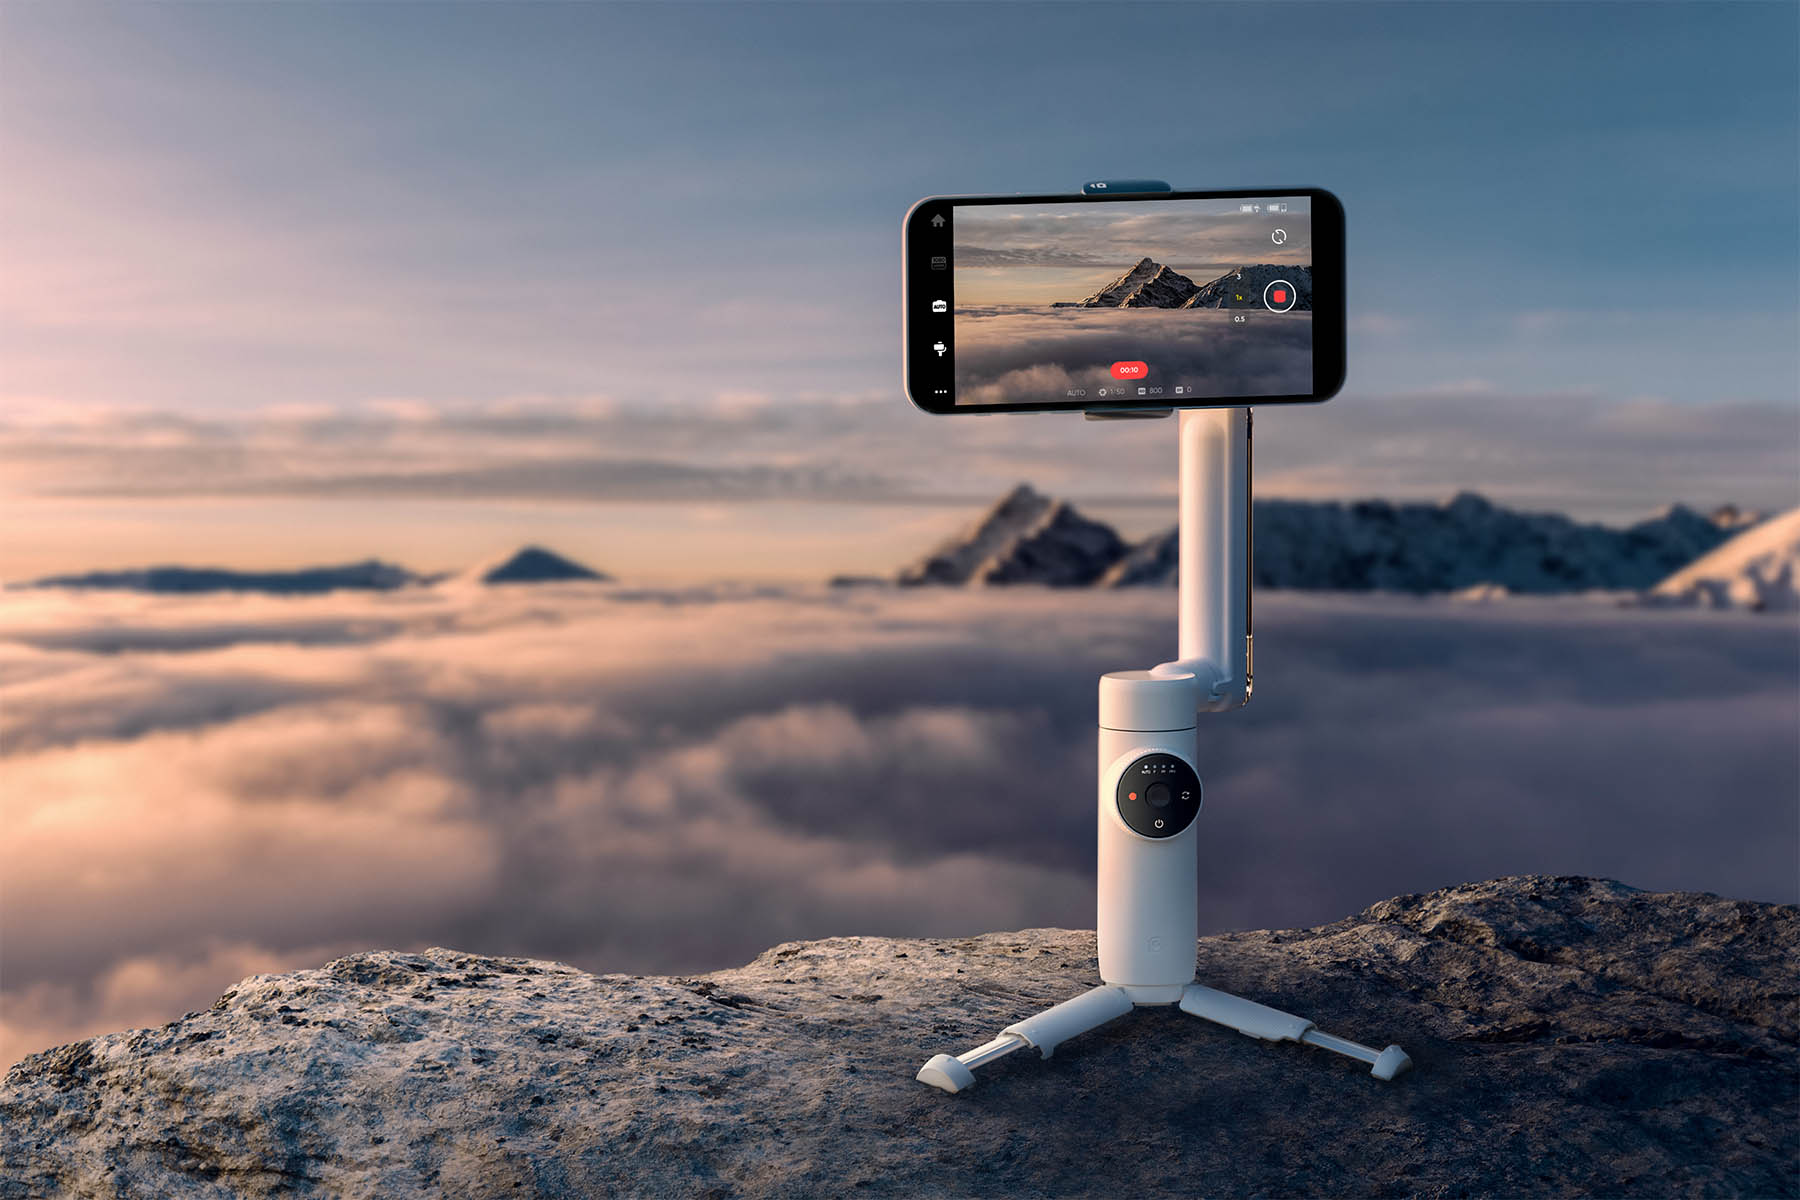 Insta360 Flow– AI Tracking Stabilizer for Smartphones - Newsshooter